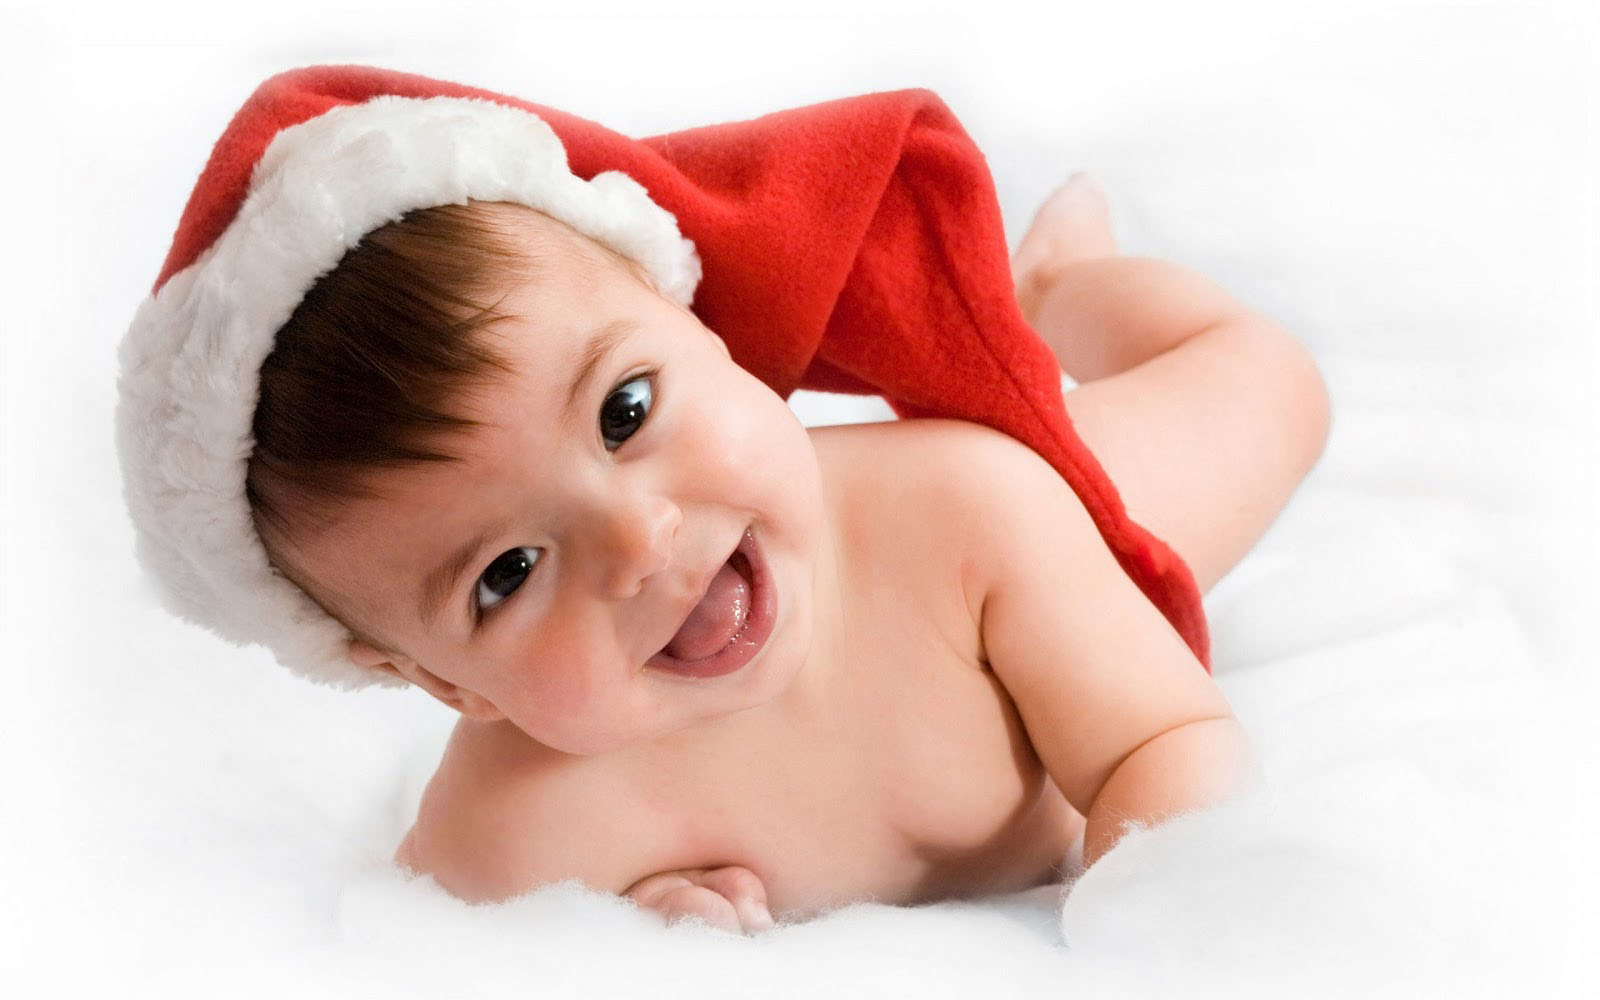 Tag Little Babies Wallpapers Images Photos and Pictures for free